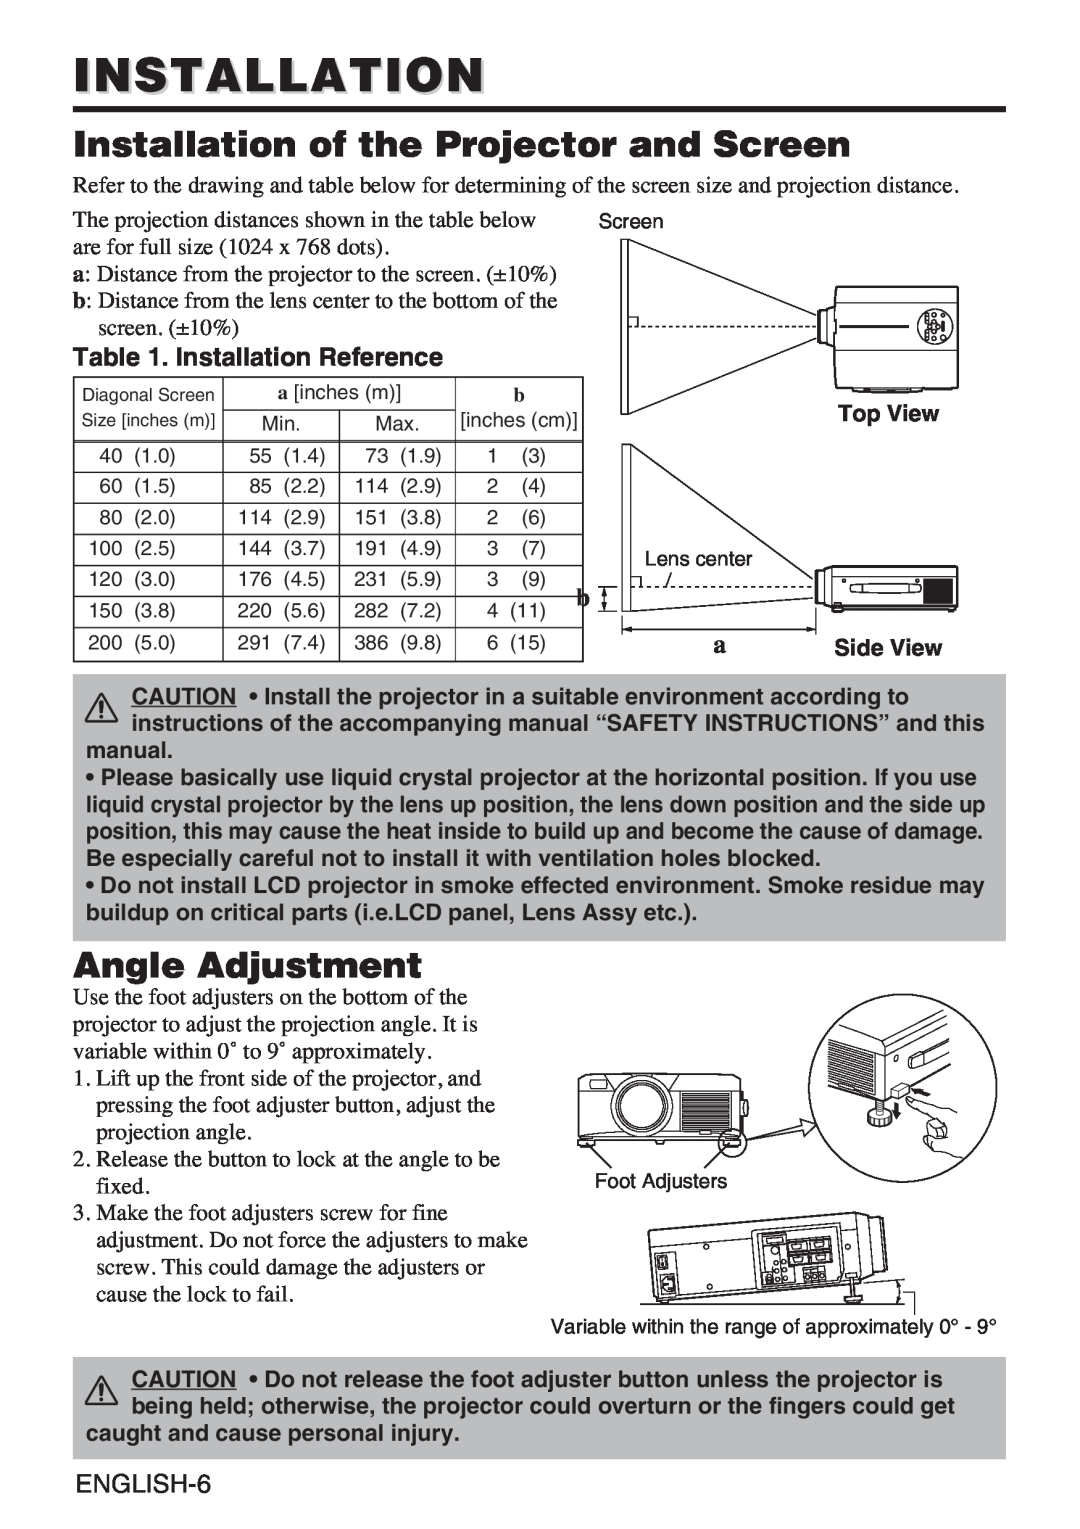 InFocus liquid crystal Installation of the Projector and Screen, Angle Adjustment, Installation Reference, ENGLISH-6 